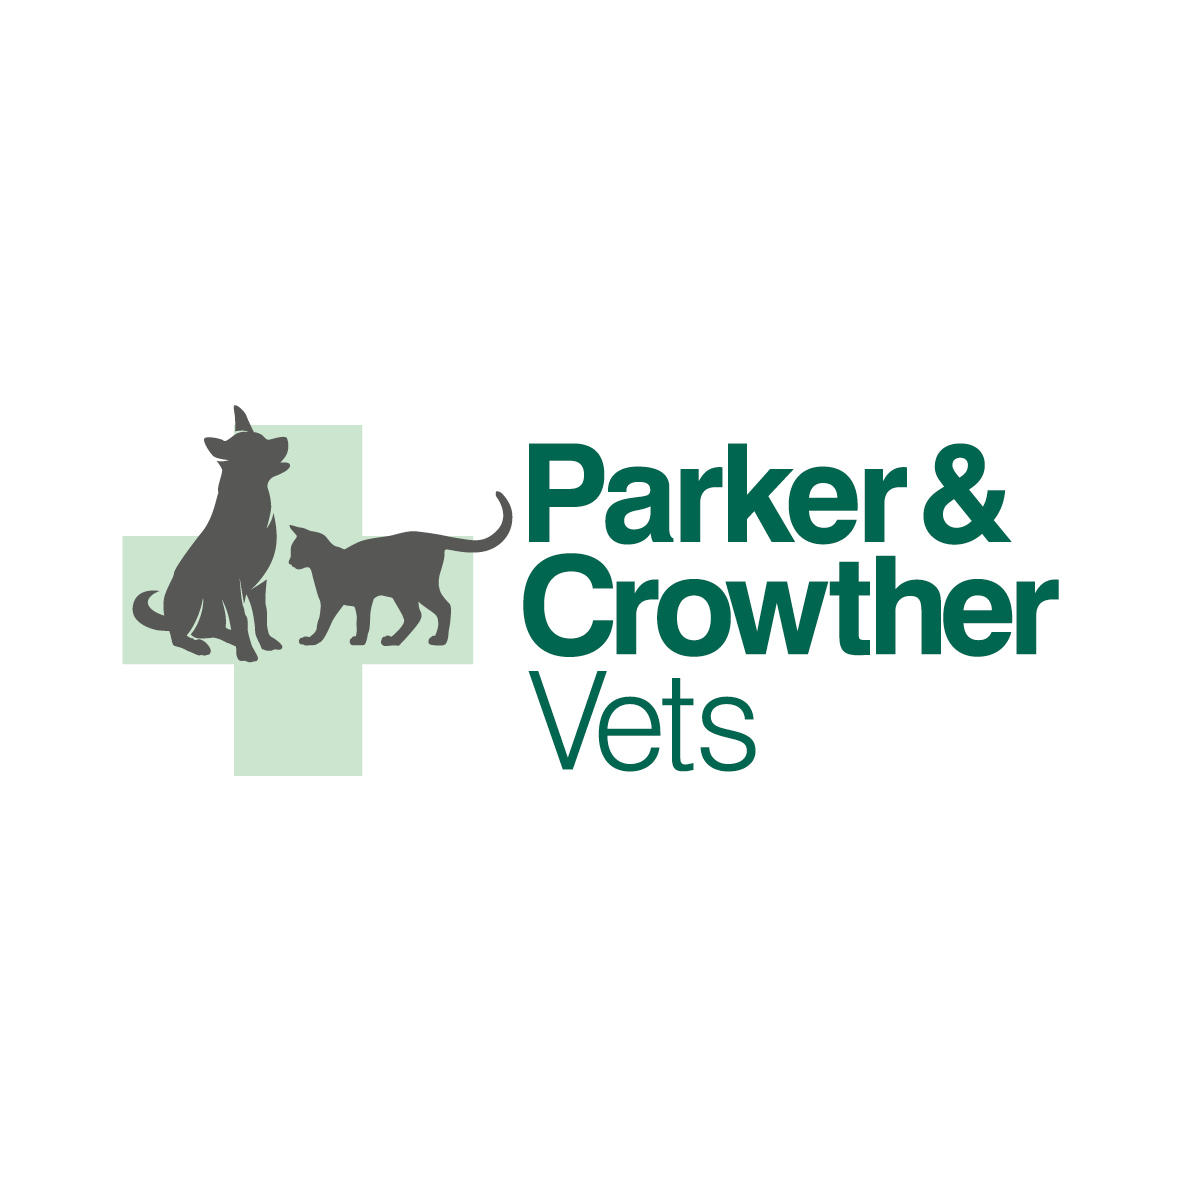 Parker & Crowther Vets, Daleside - Southport, Merseyside PR8 3DE - 01704 575606 | ShowMeLocal.com